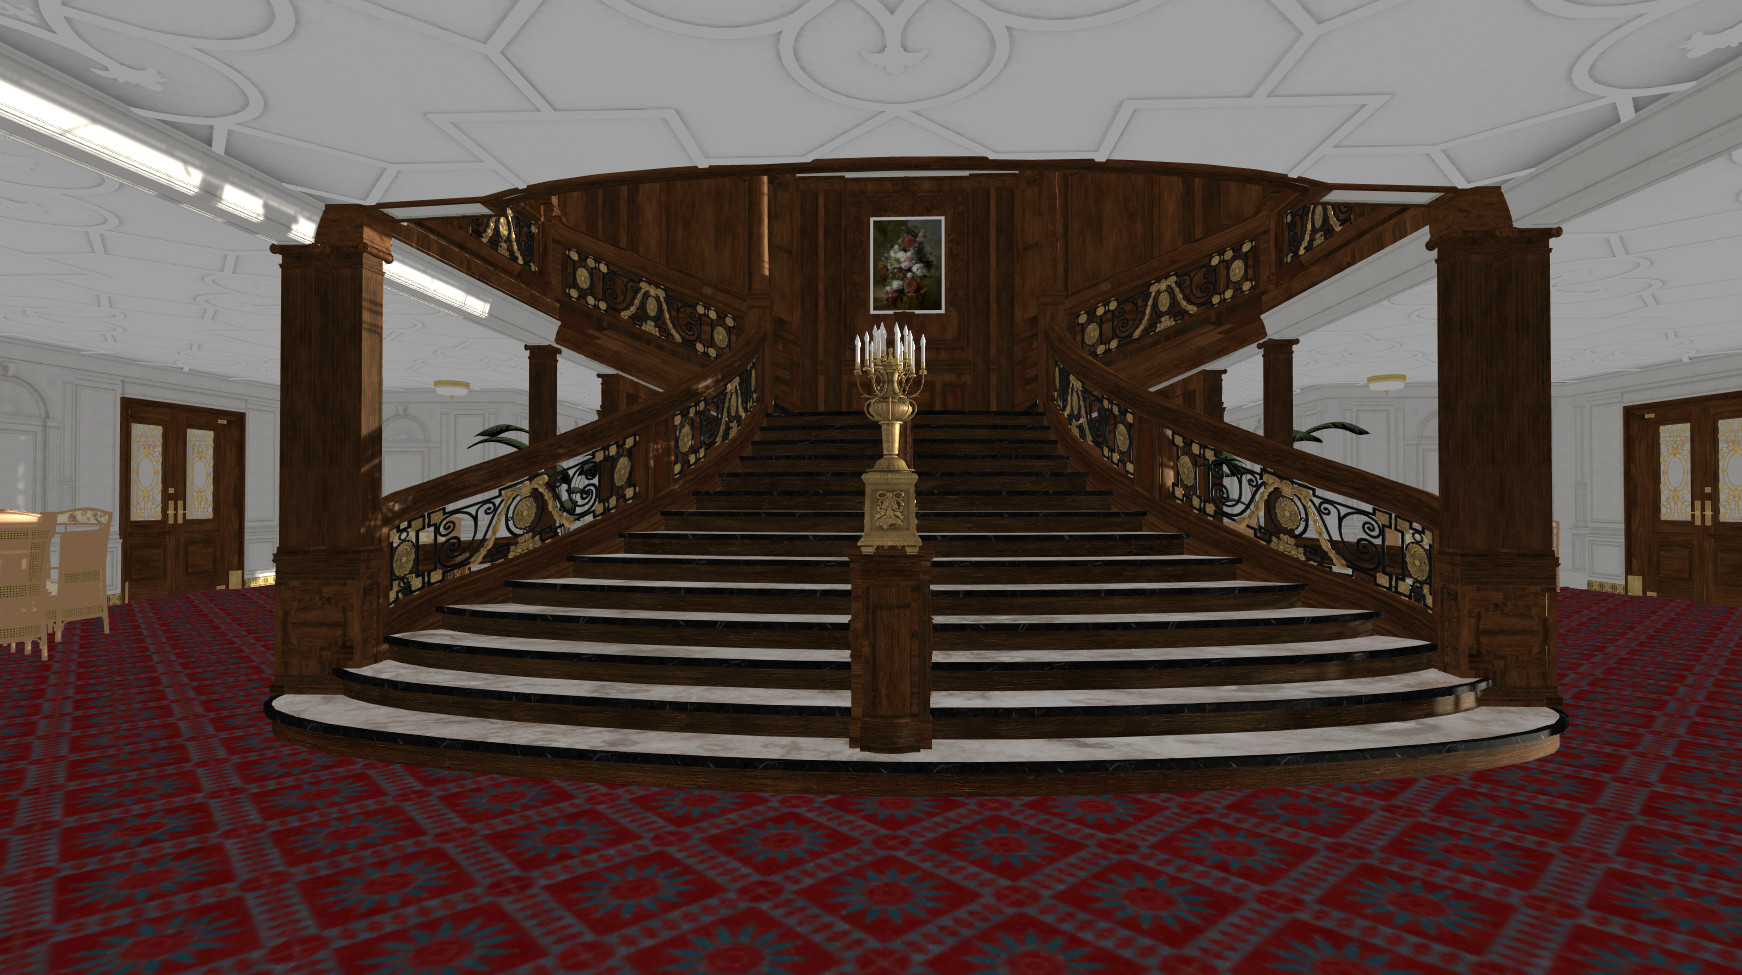 titanic video game relive the experience